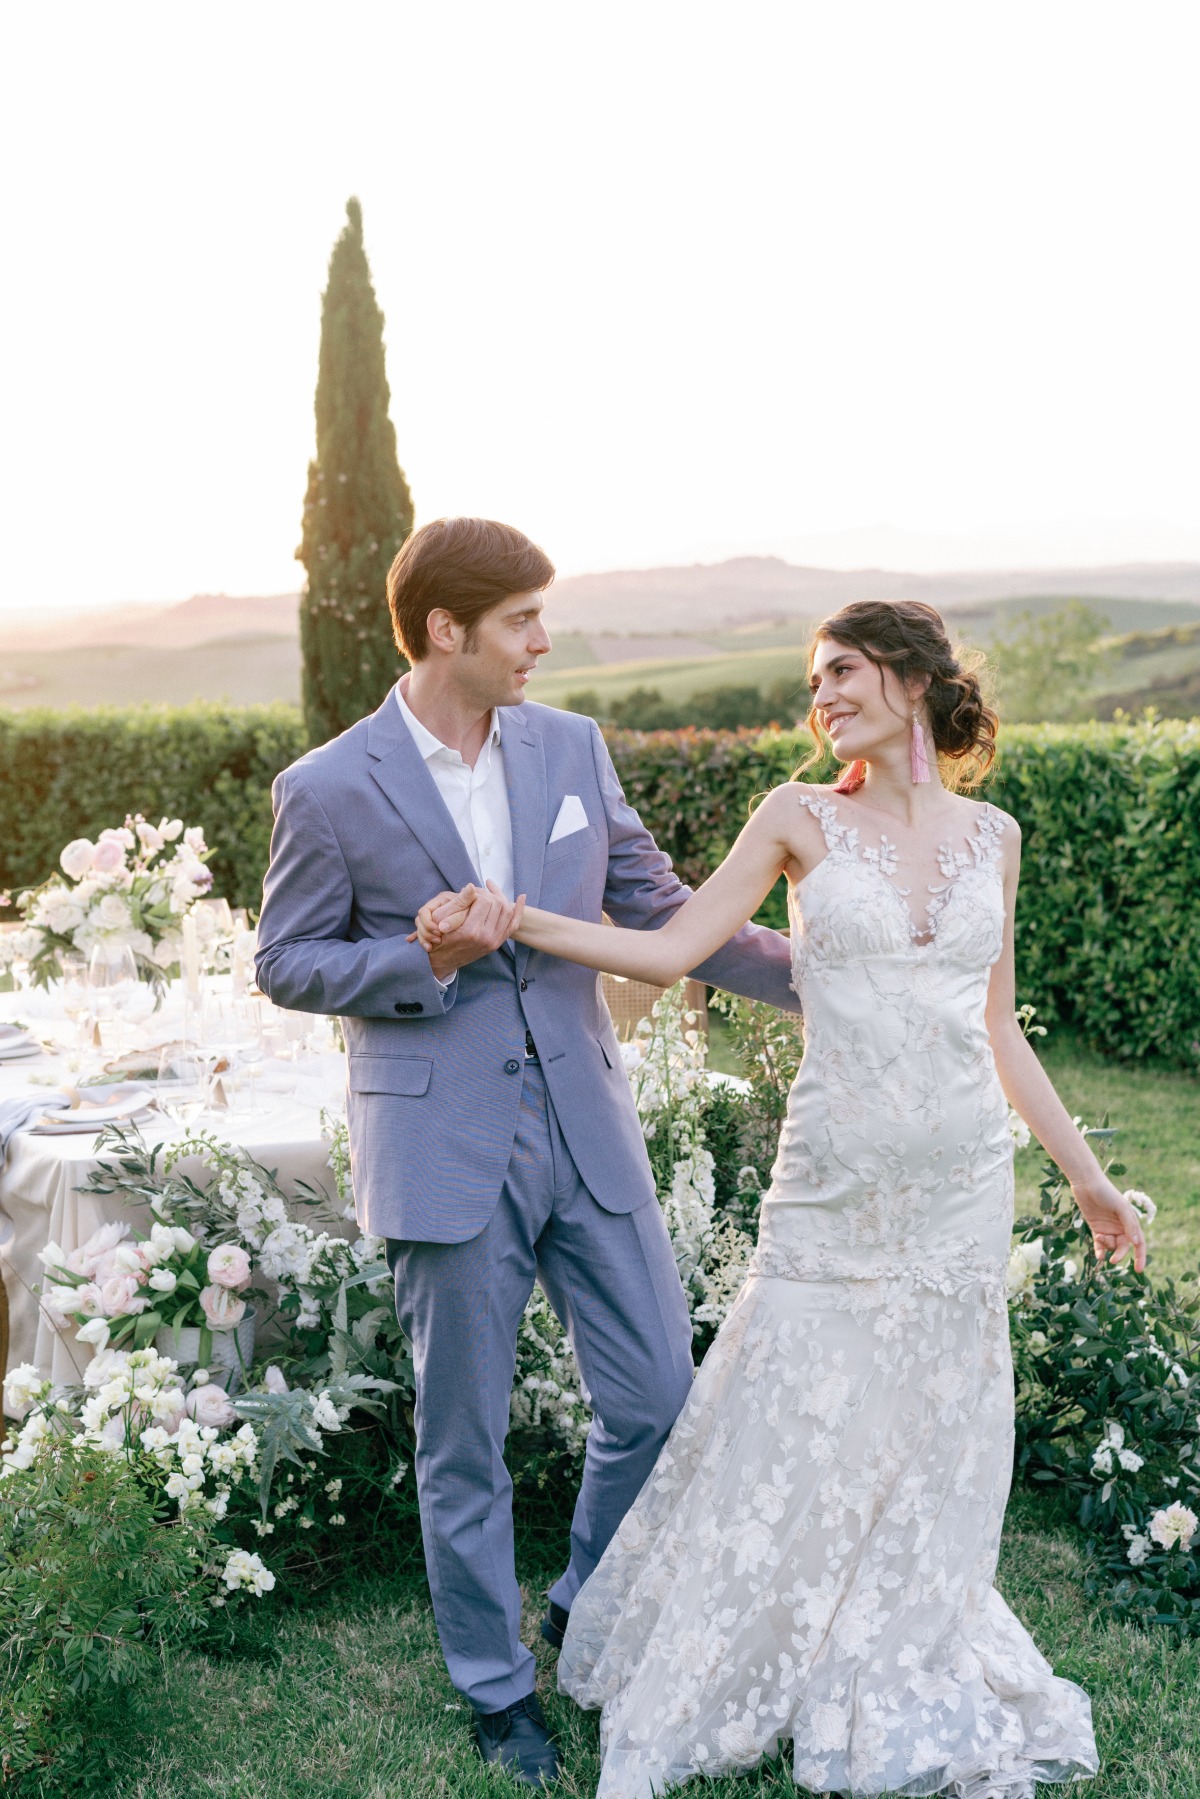 Dreamy and elegant golden hour reception in Tuscany 